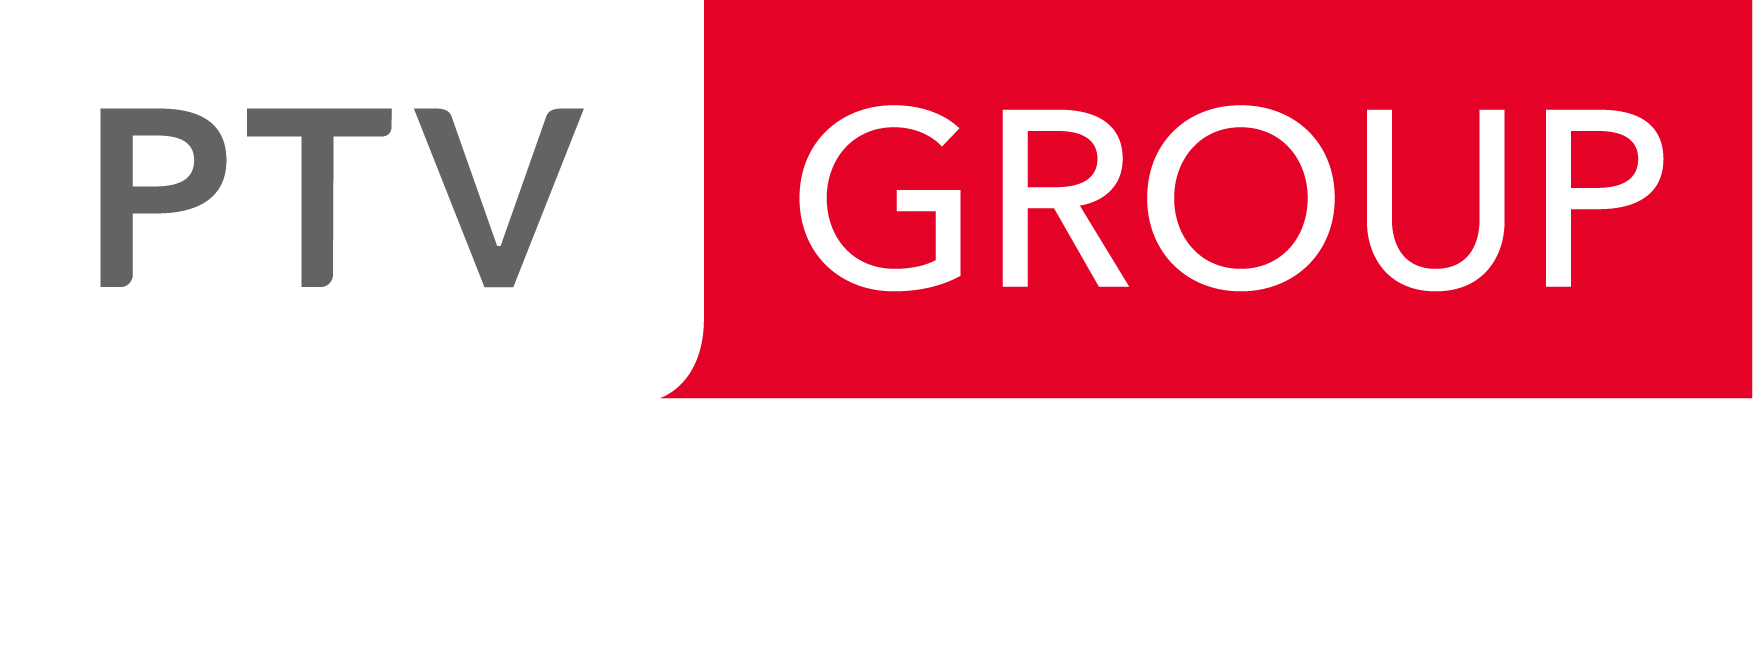 PTV Group | The mind of movement